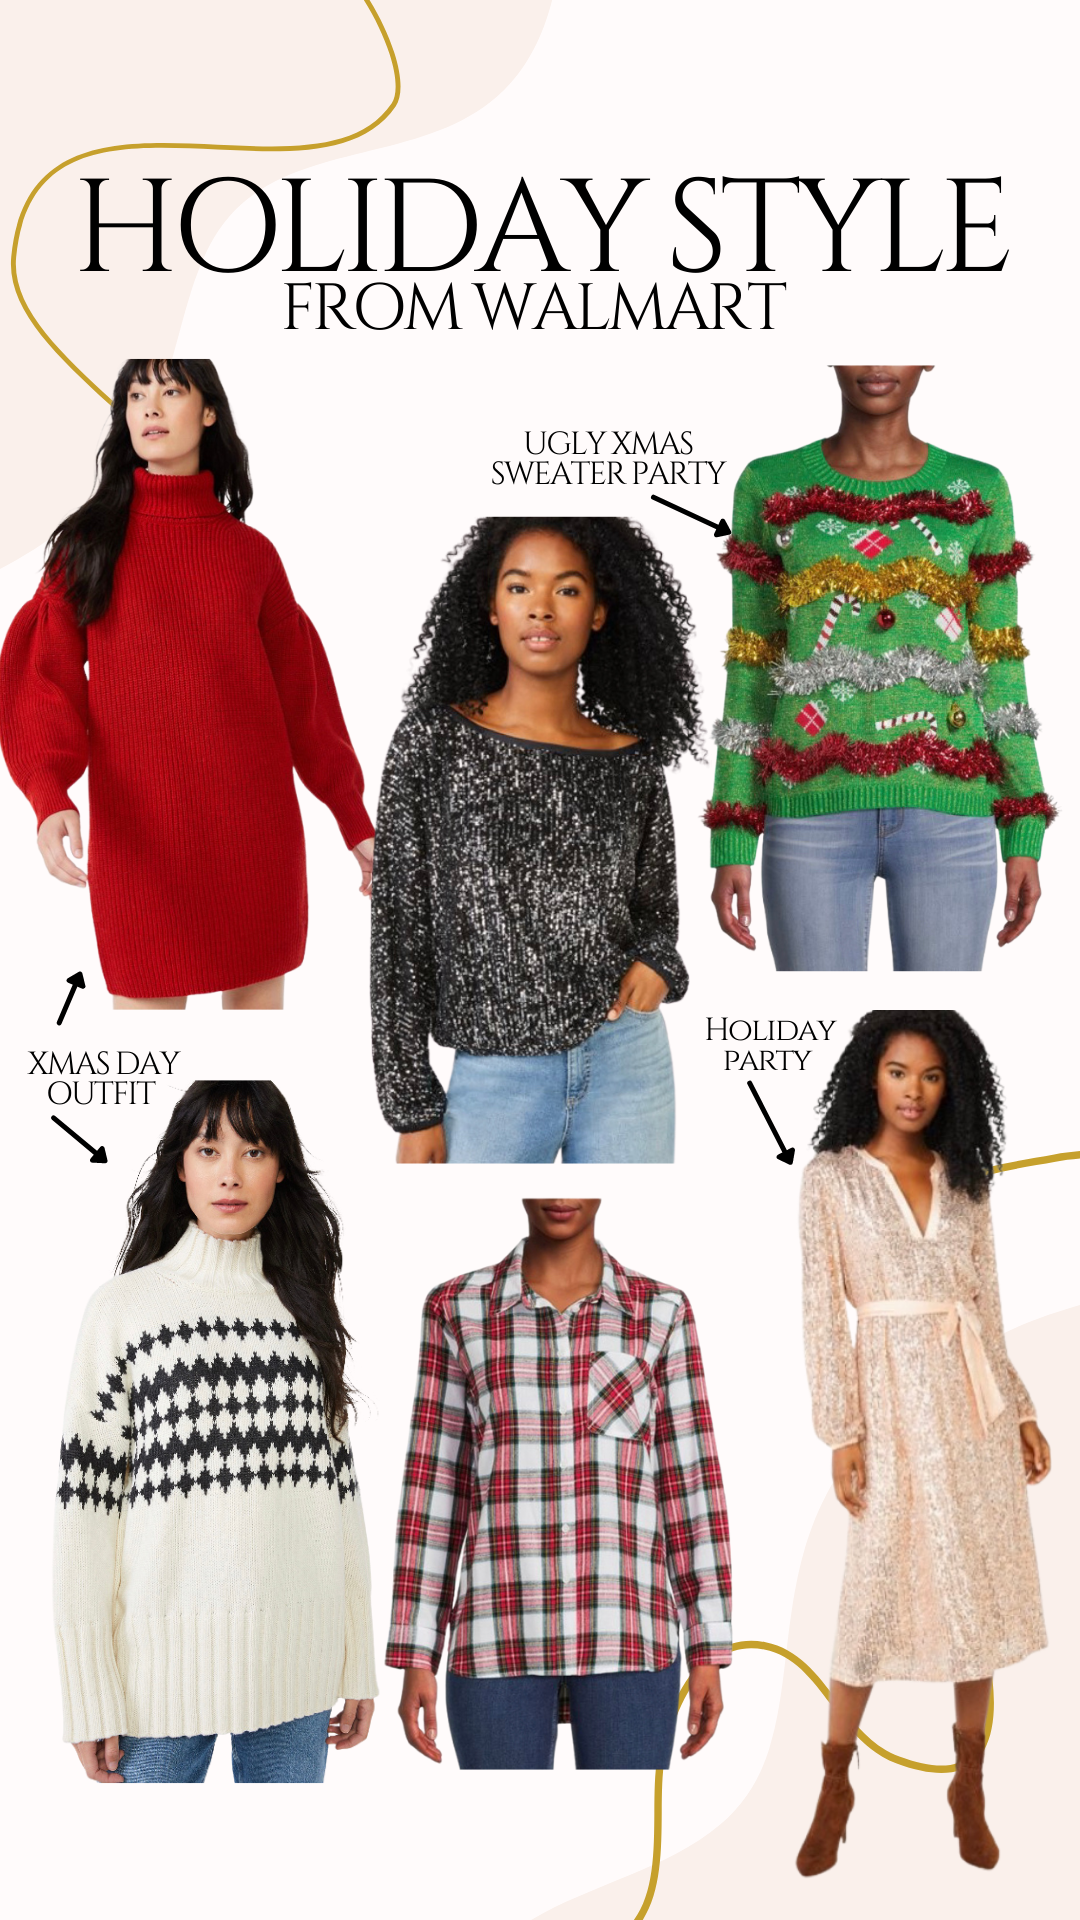 WALMART HOLIDAY STYLE + GIFT GUIDE: Jaclyn De Leon Style- sharing gift ideas for her and cute affordable holiday looks